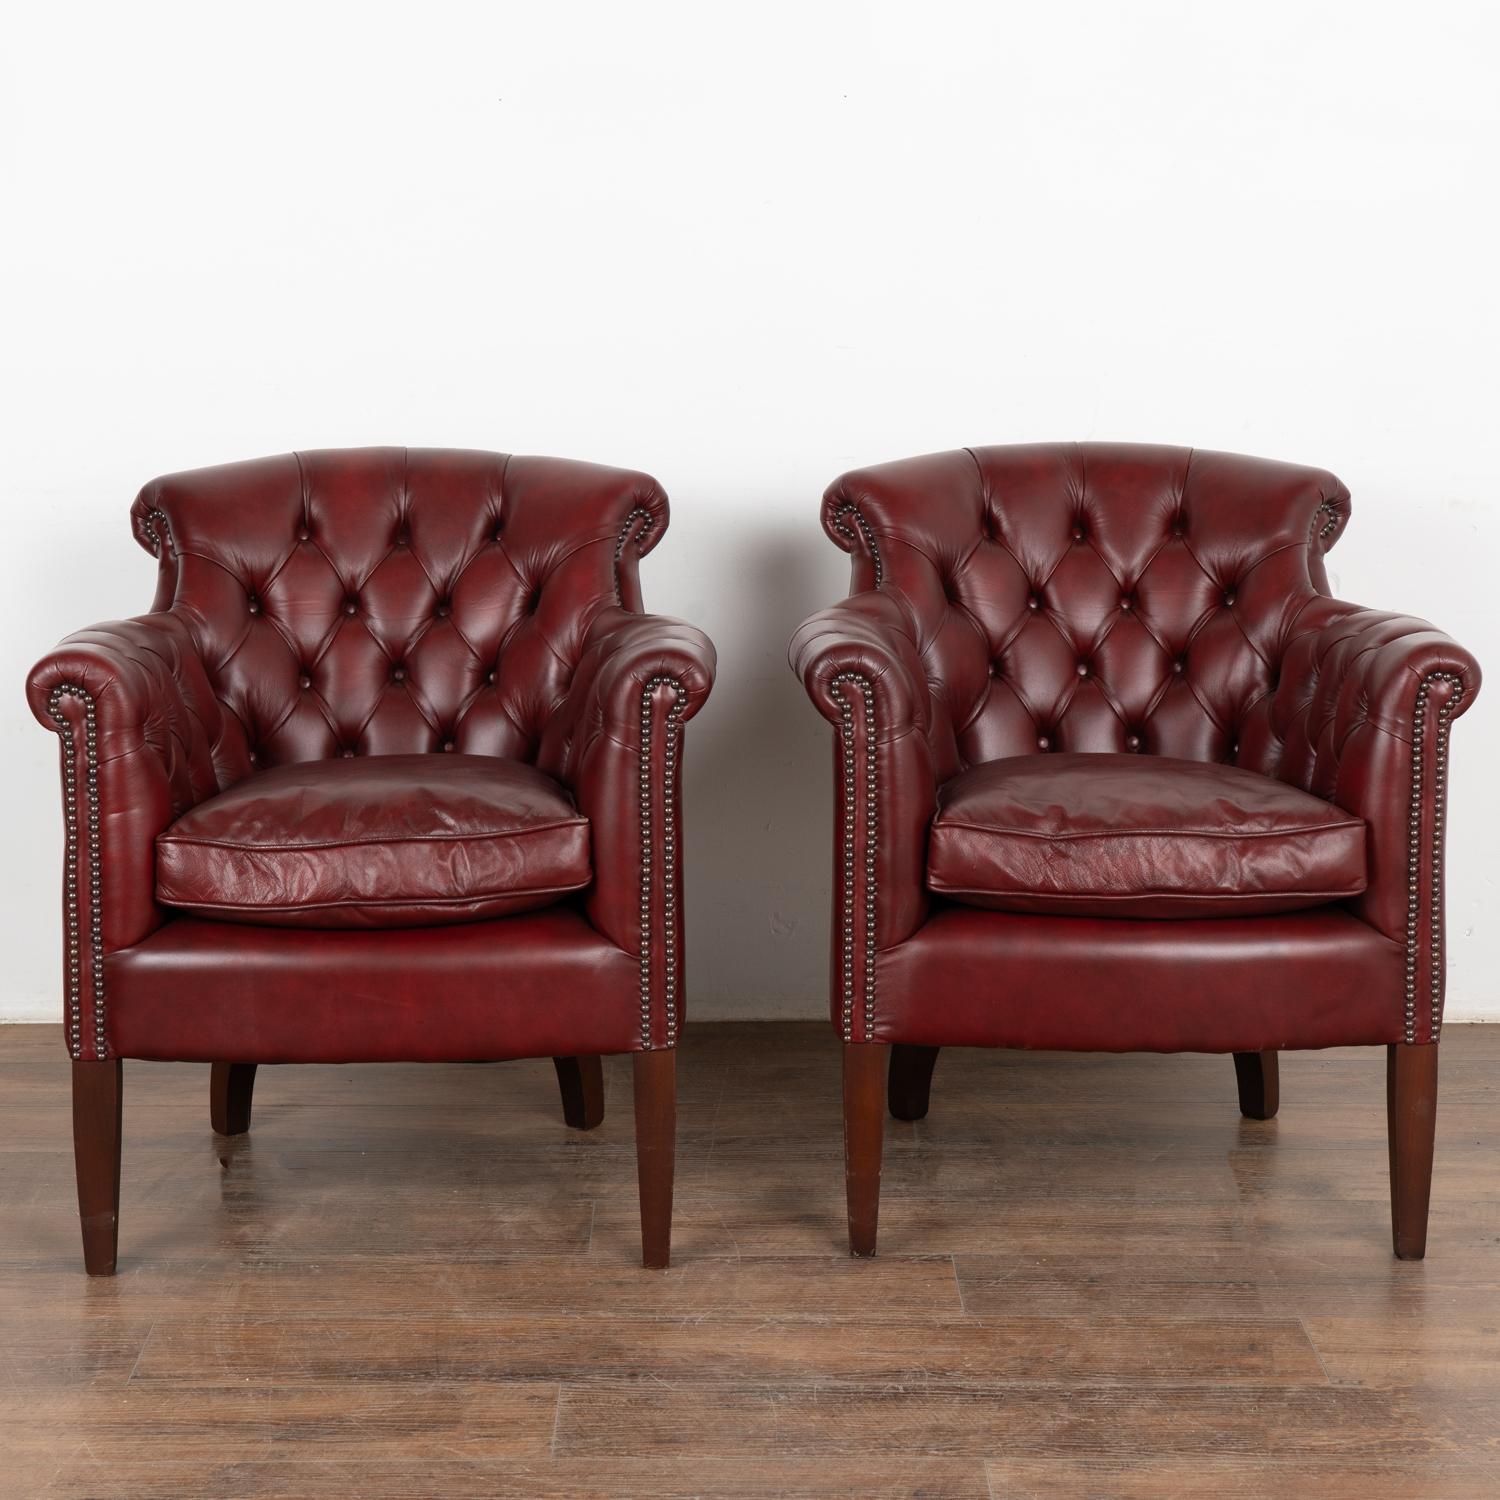 Danish Pair, Vintage Red Leather Chesterfield Club Armchairs, Denmark circa 1940-60 For Sale